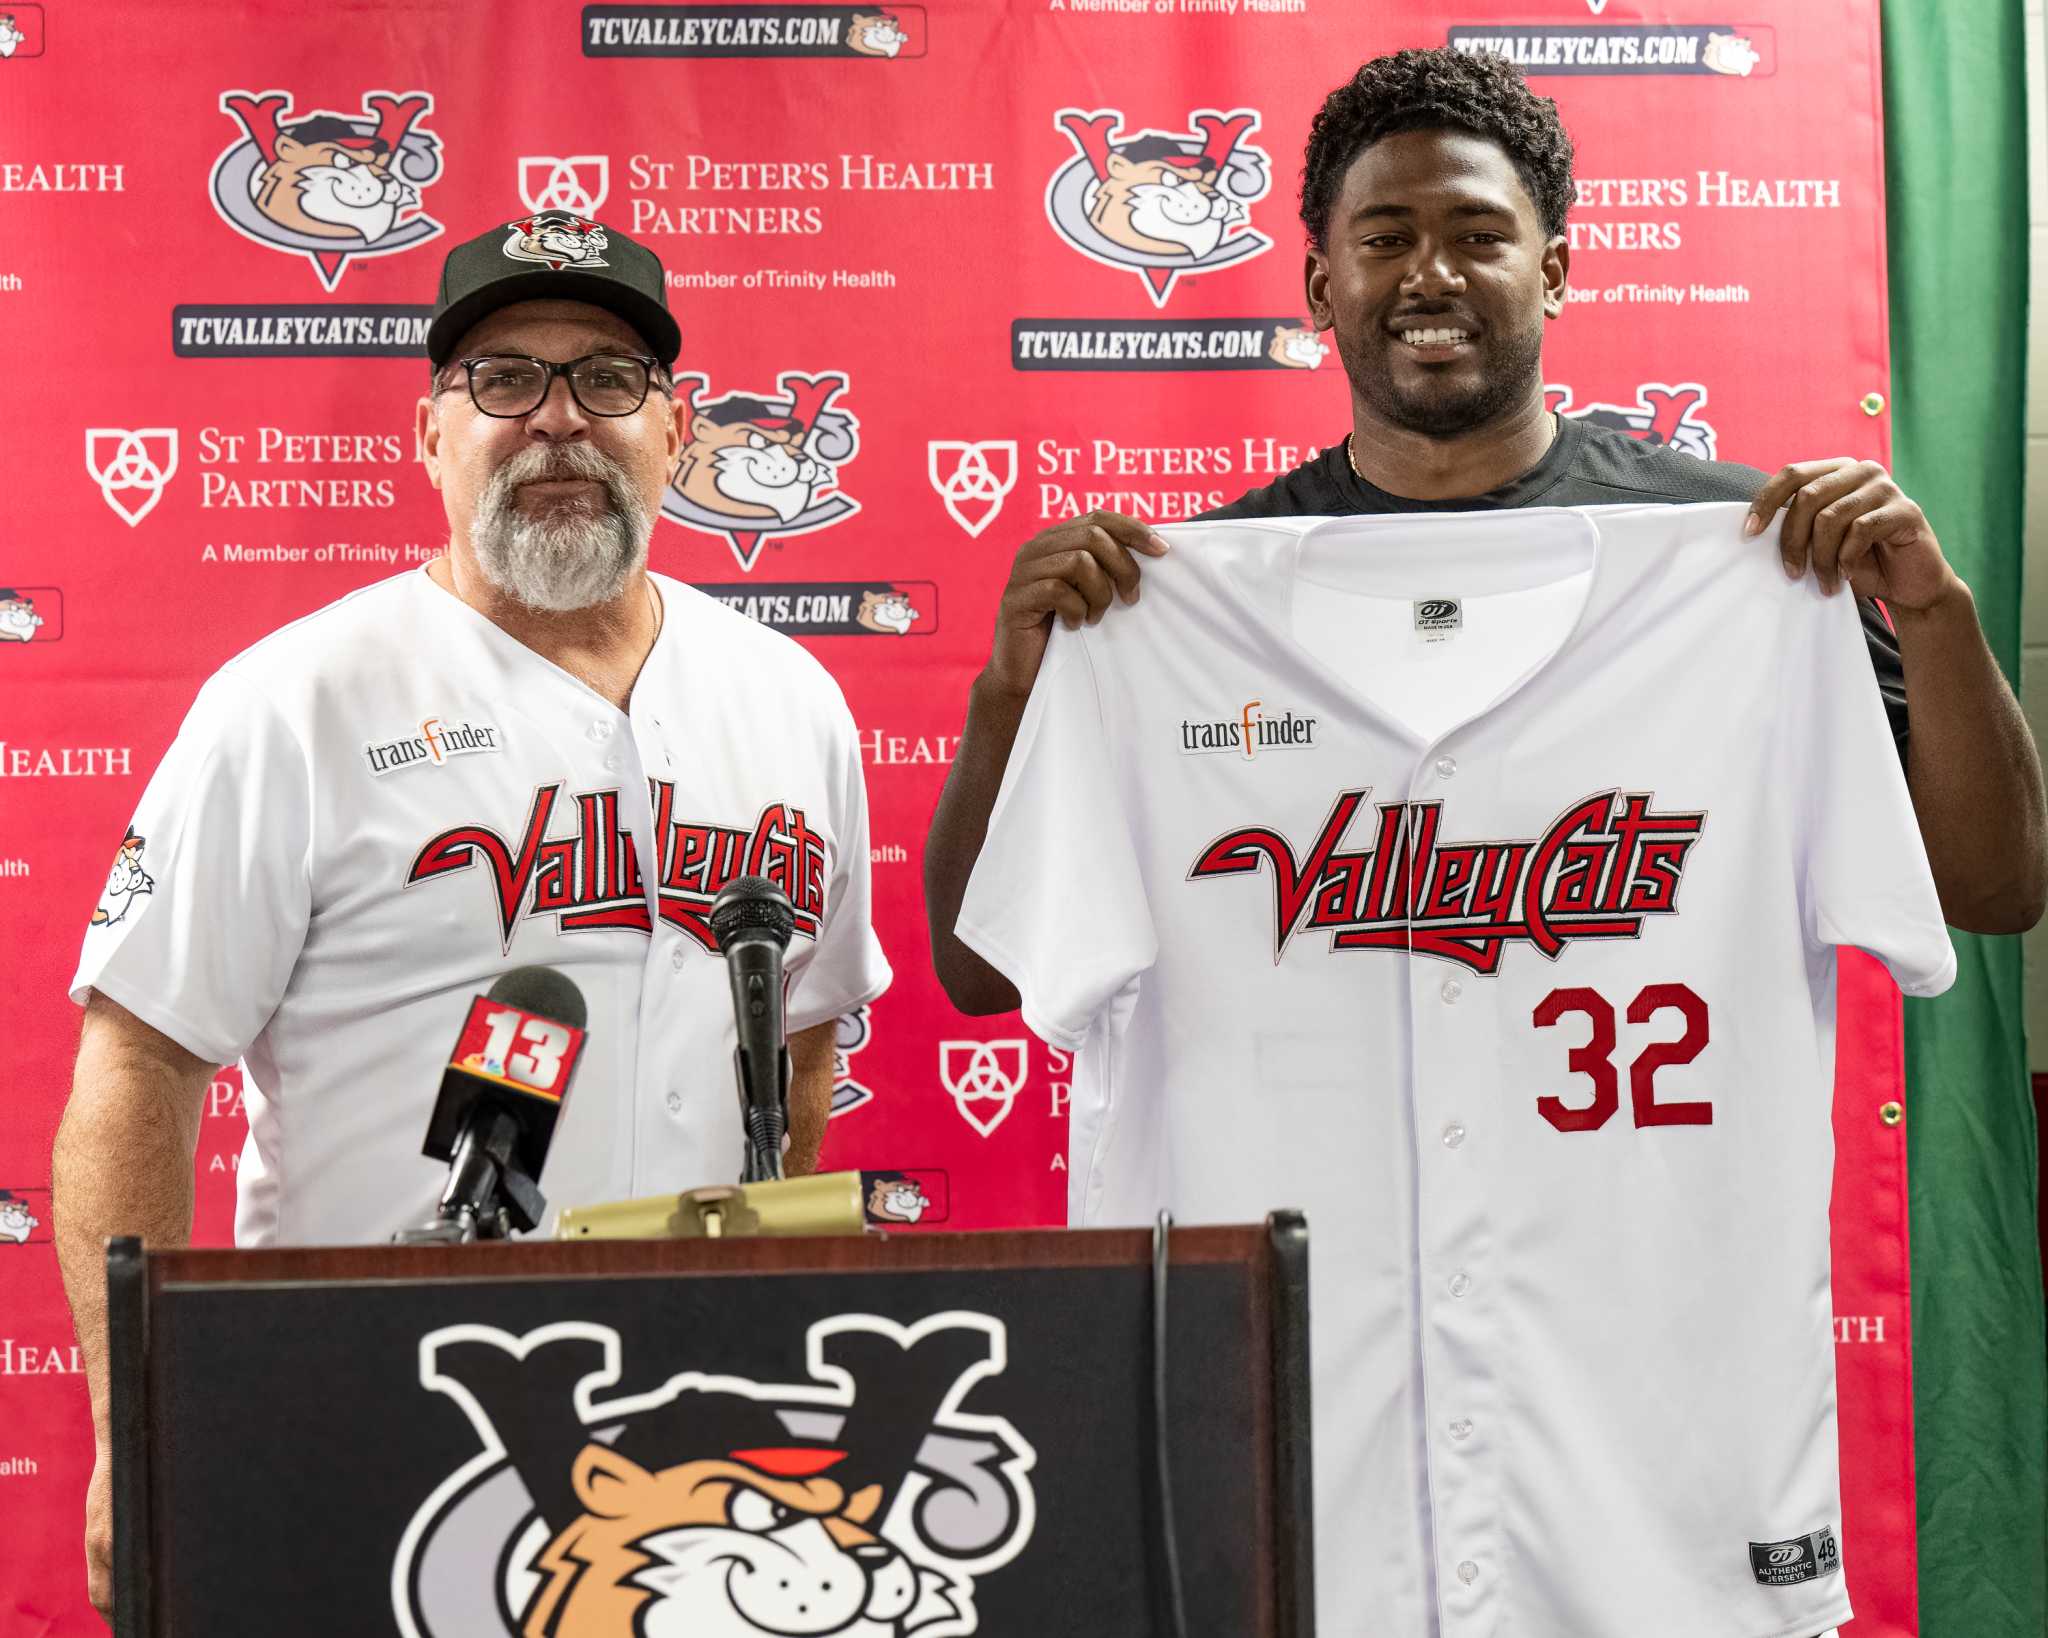 ValleyCats pitcher Kumar Rocker glad to be back on field - Times Union